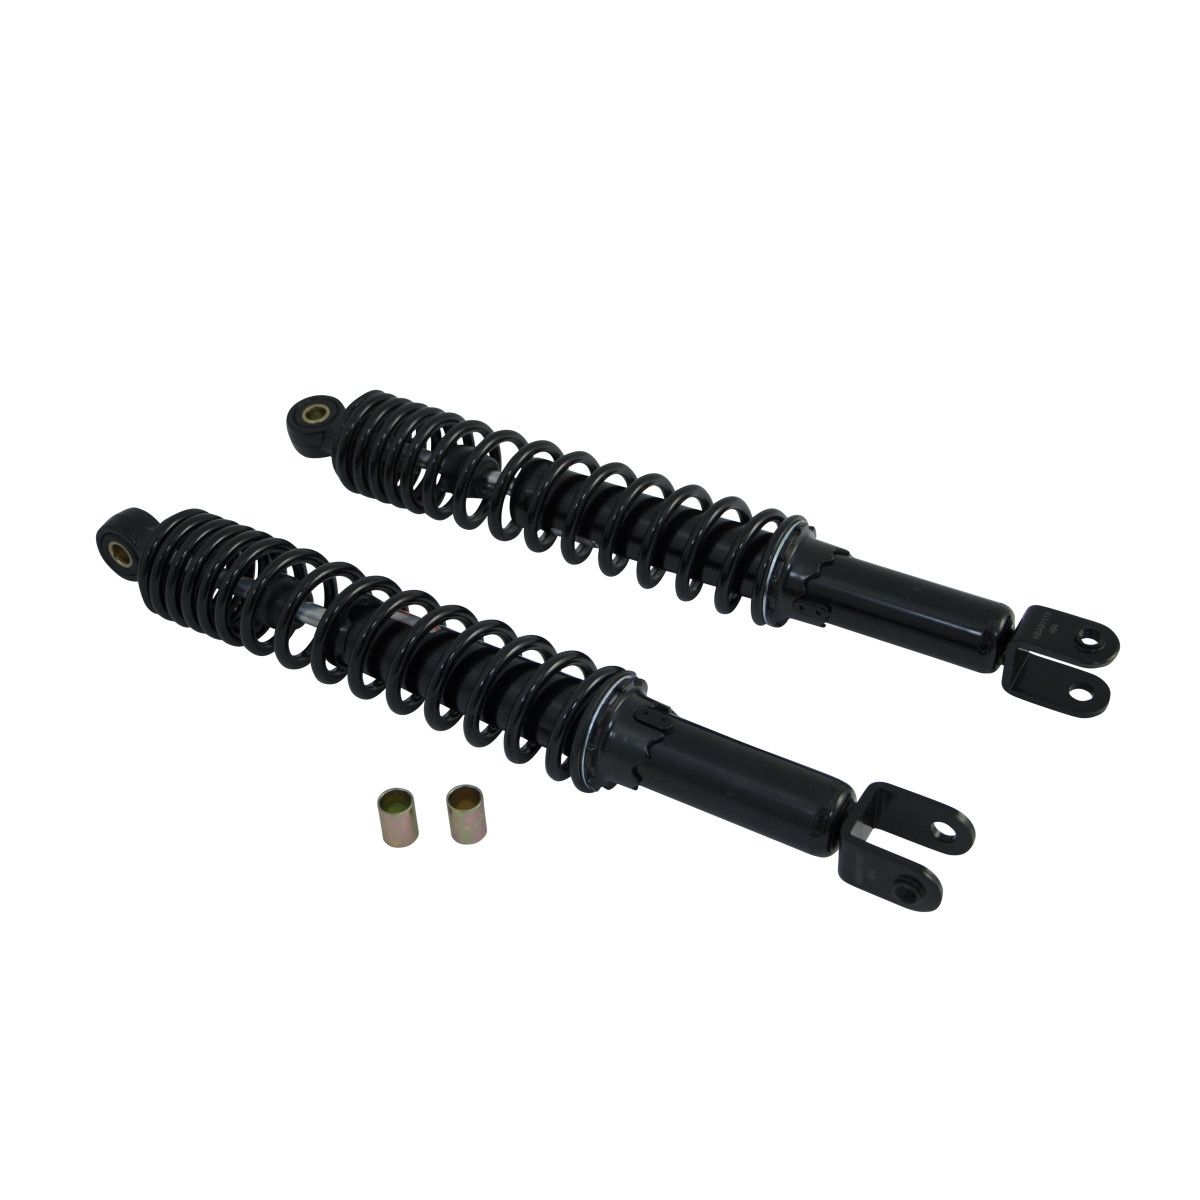 YSS TD220-400P-03-88 HIGH PERFORMANCE SERIES SCOOTER SHOCK ABSORBER